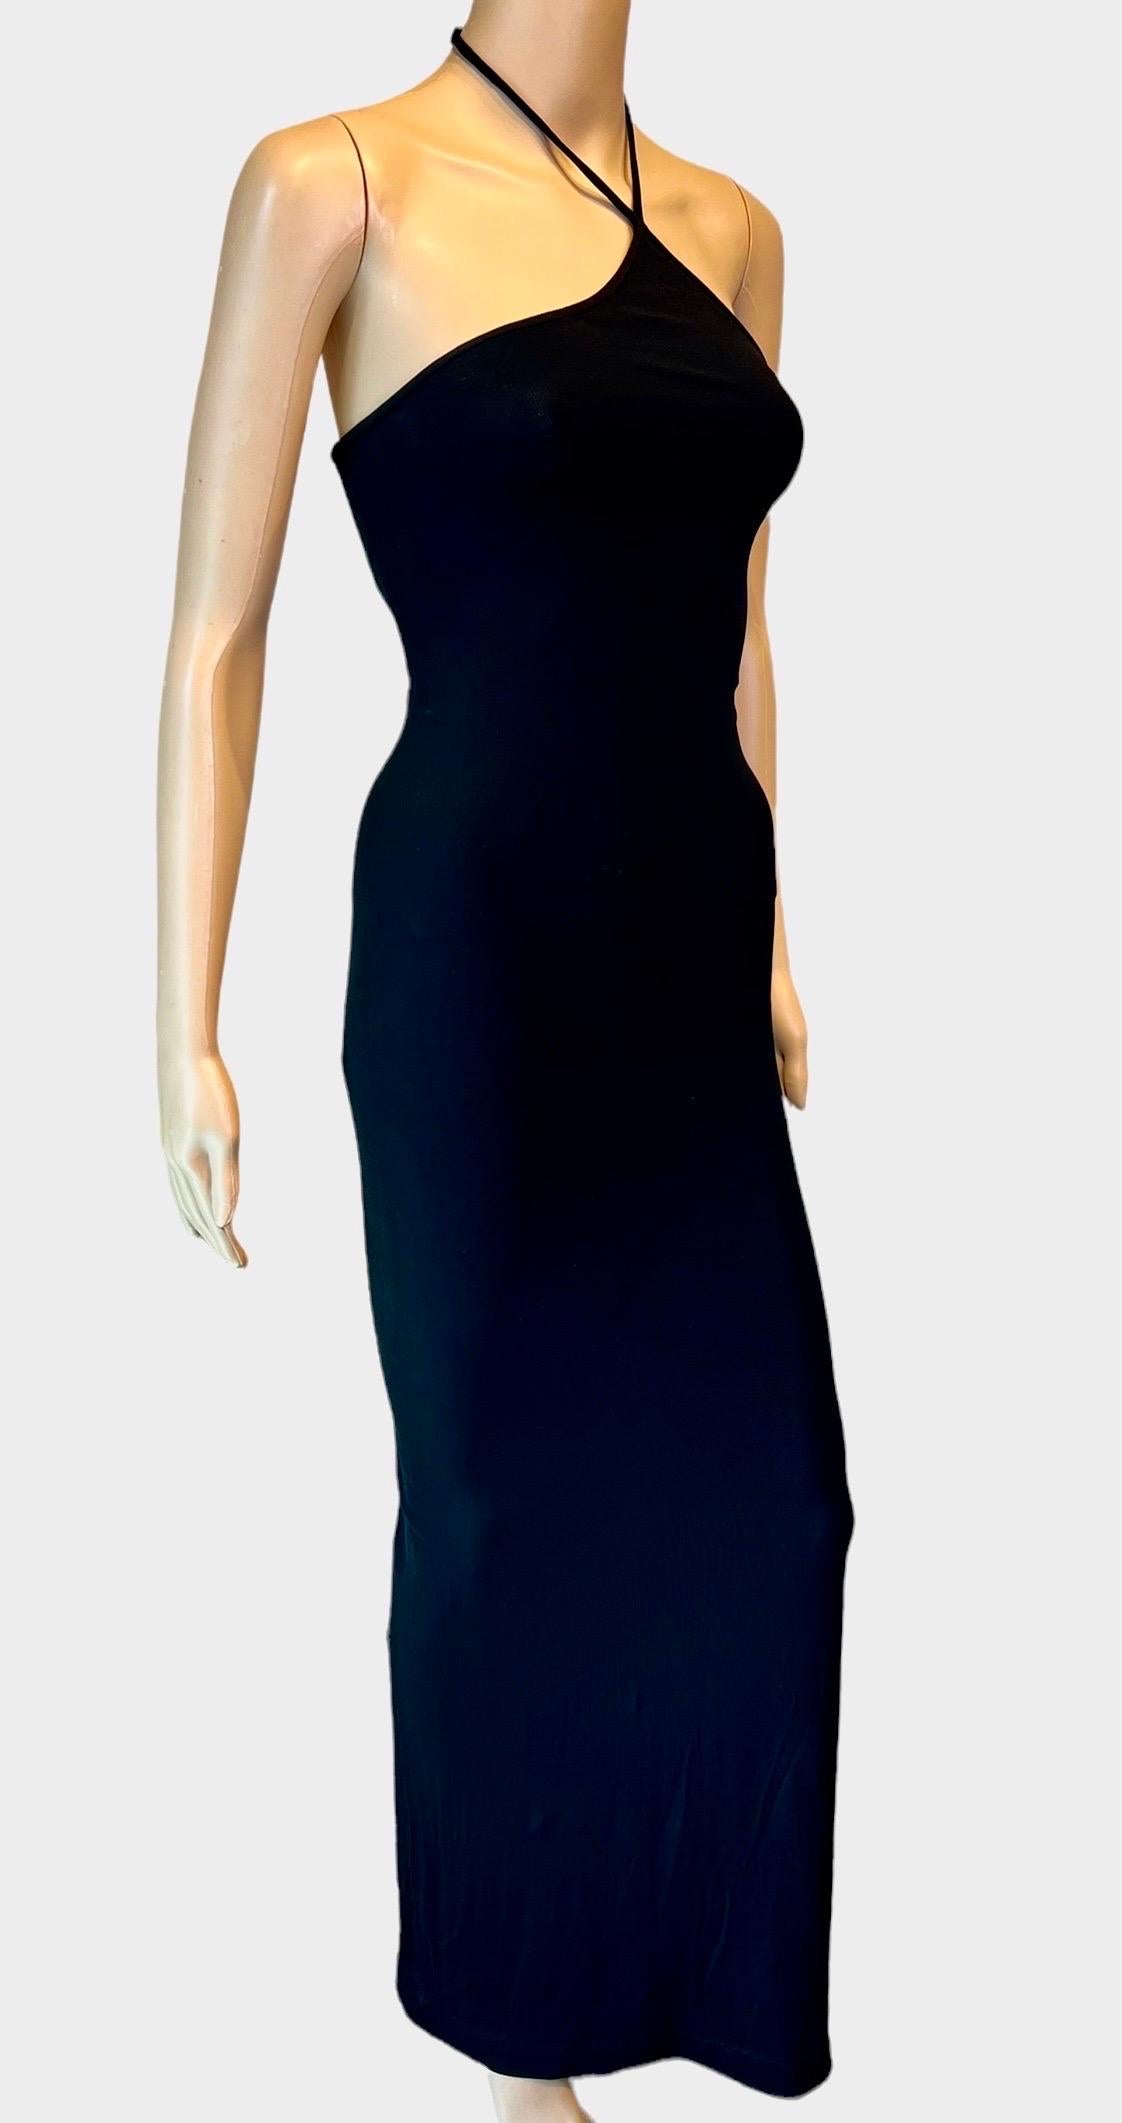 Tom Ford for Gucci F/W 1997 Asymmetrical Halter Bodycon Backless Black Evening Dress Gown IT 44